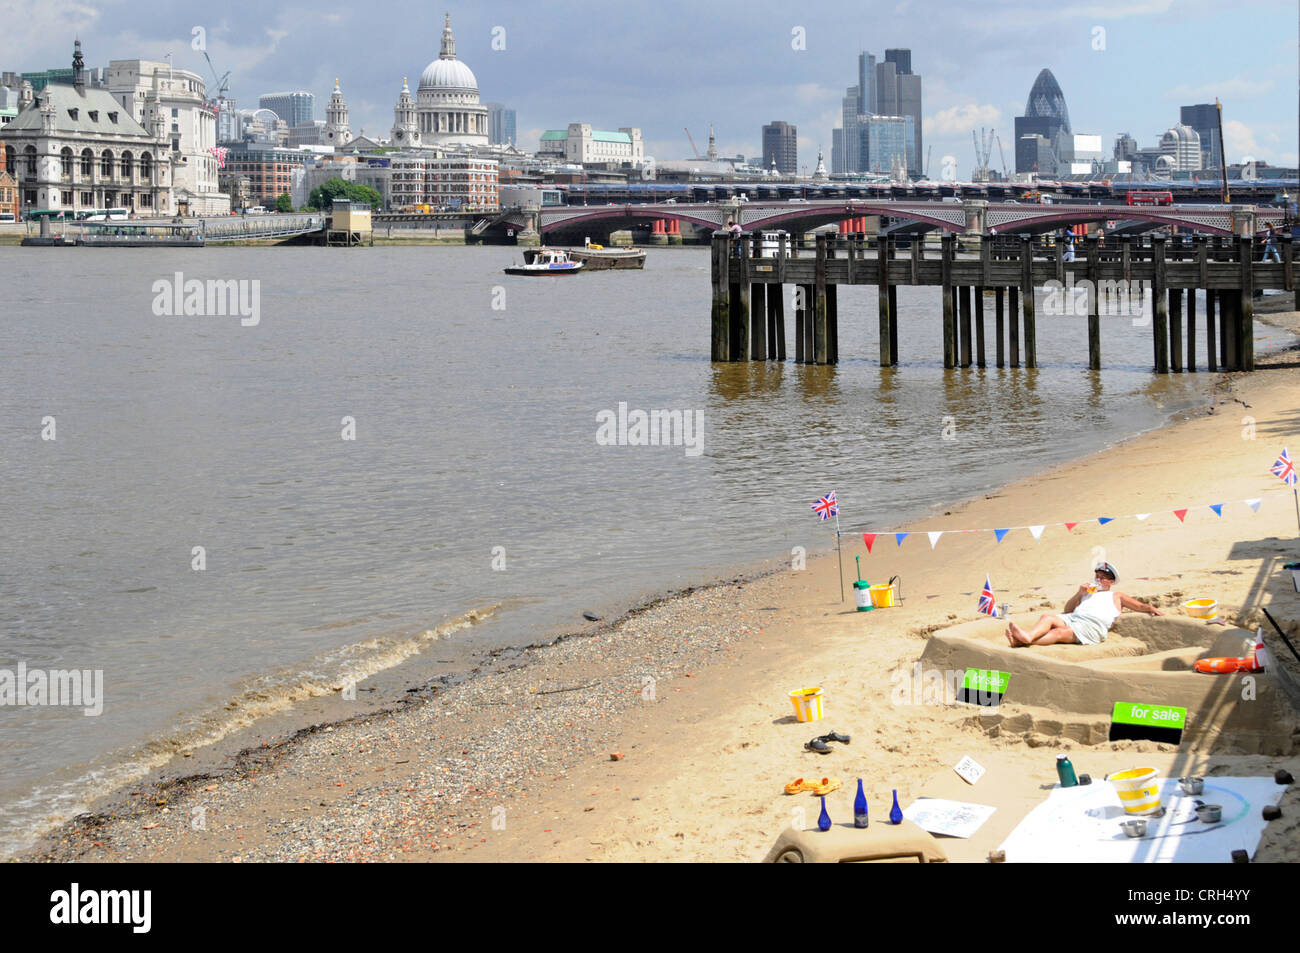 Low tide sandy beach beside River Thames man creating sand sculptures with City of London skyline beyond (phone numbers deleted) Stock Photo